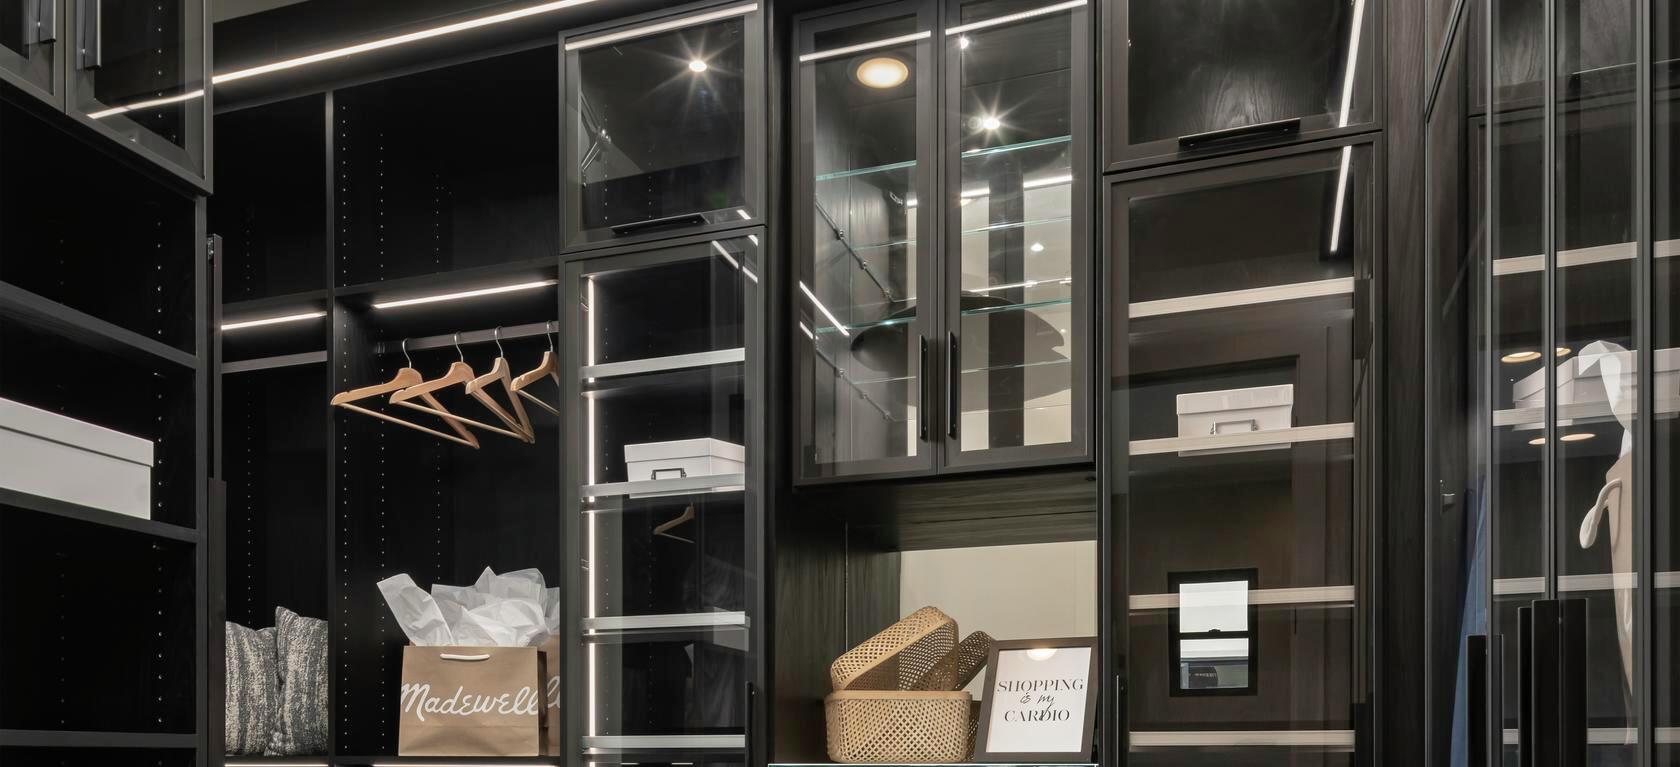 10 Ideas for Designing the Closet of Your Dreams